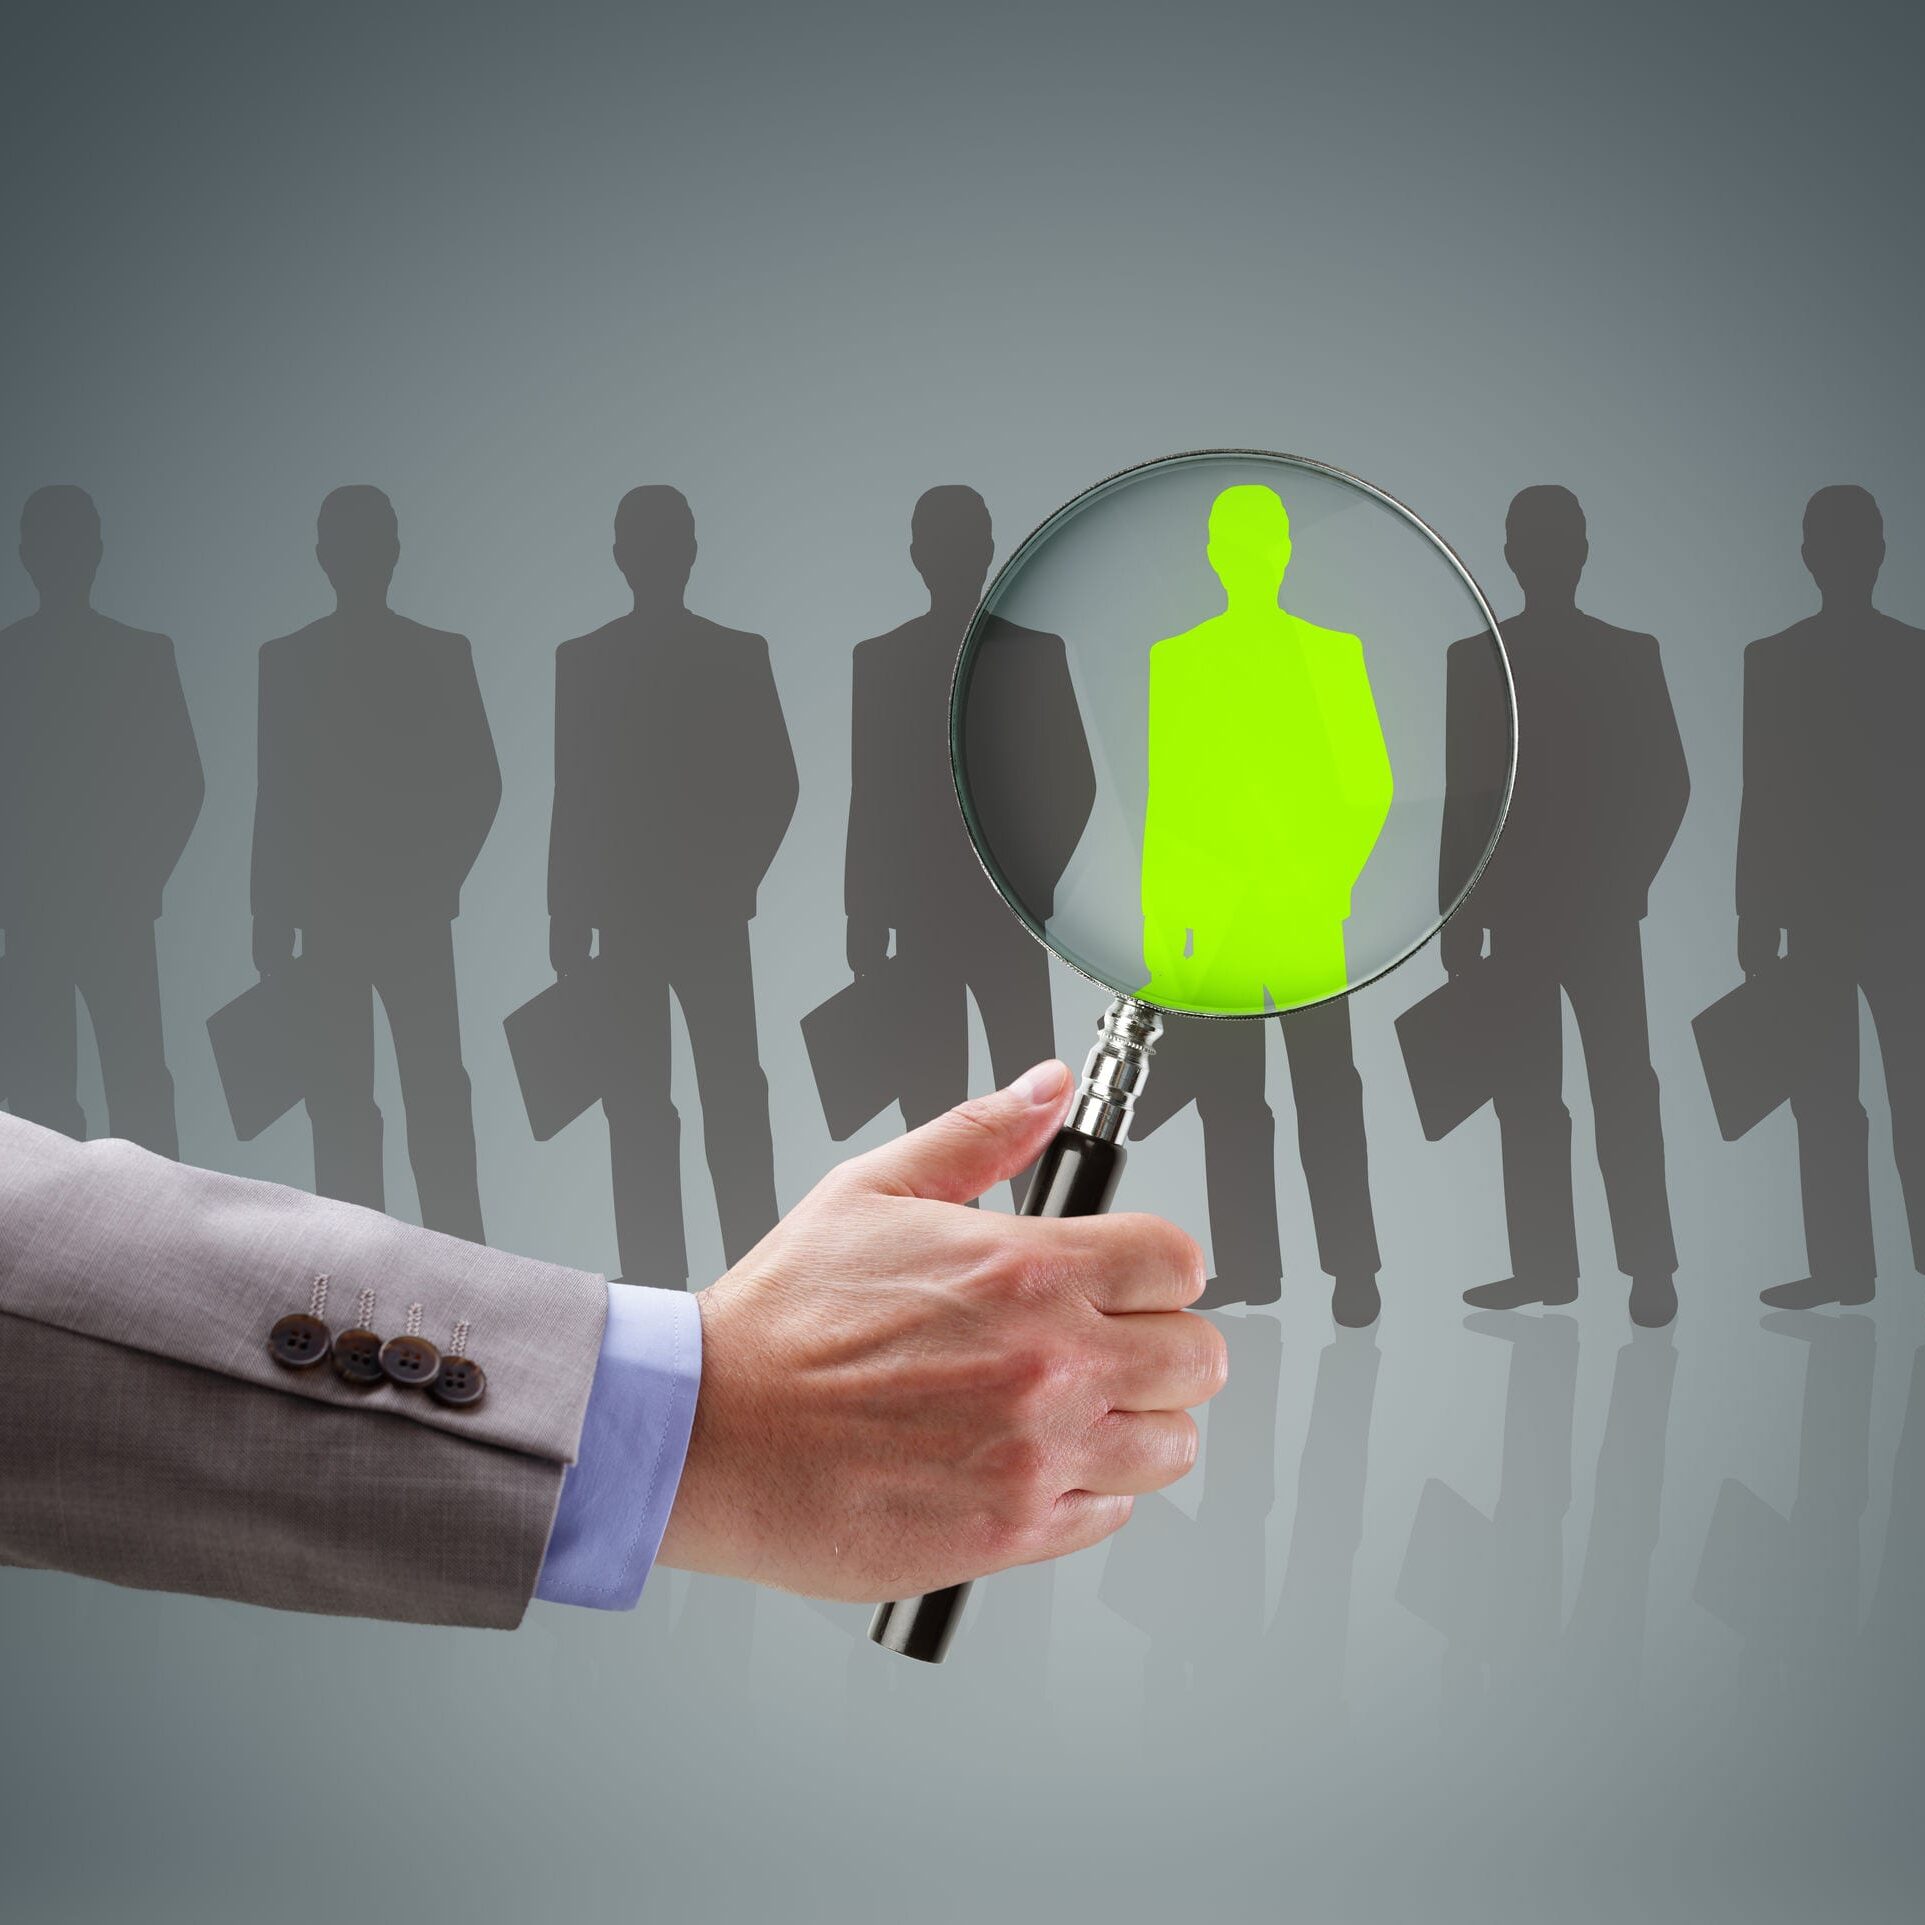 Recruitment and job search concept for choosing the right people and human resources